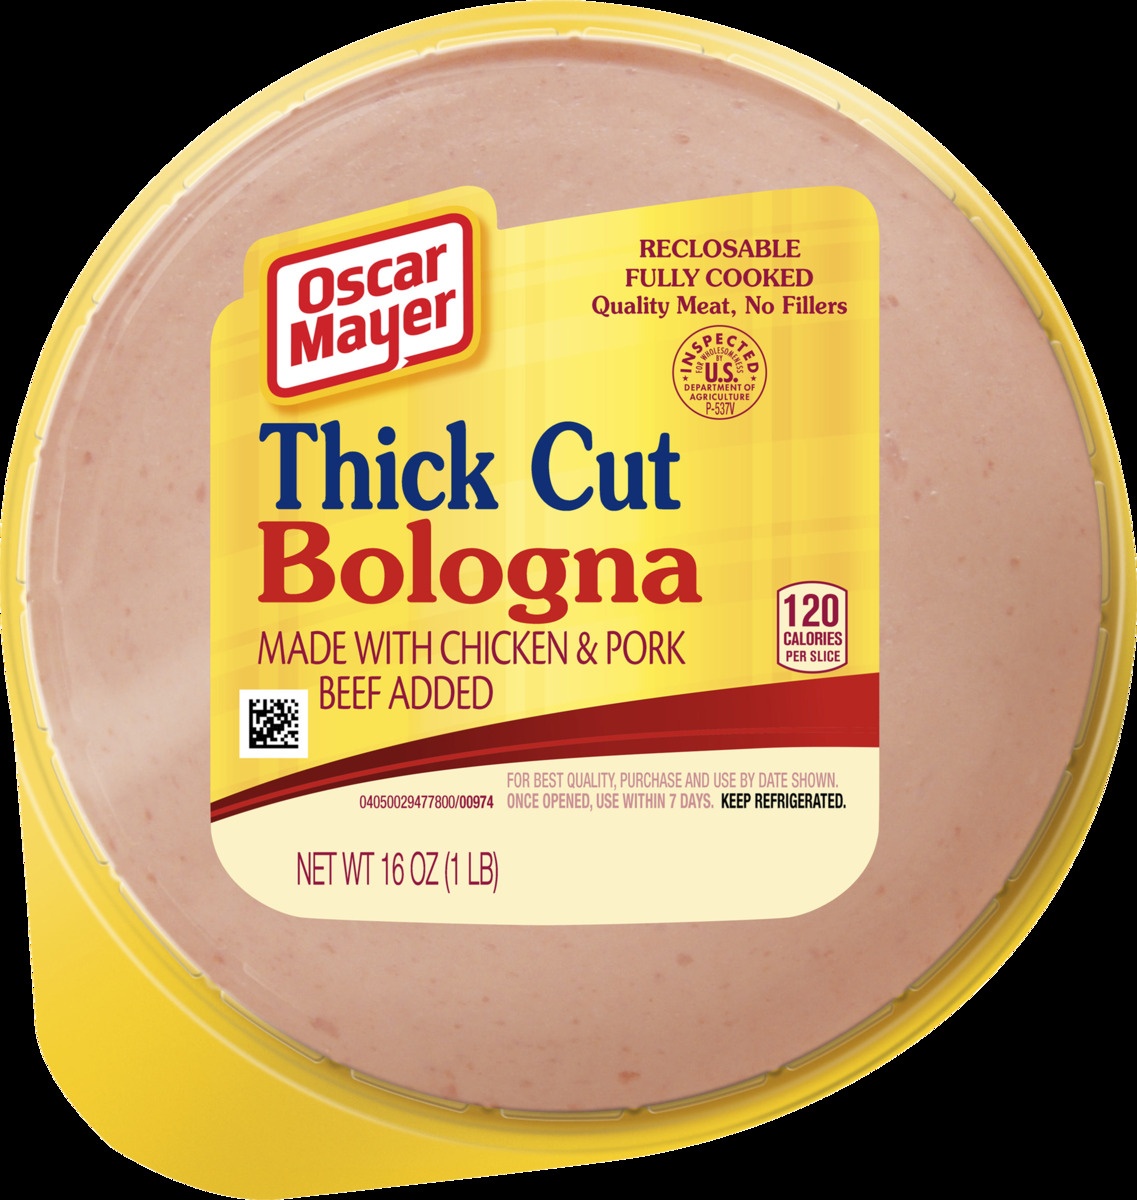 slide 2 of 2, Oscar Mayer Thick Cut Bologna Made with Chicken & Pork, Beef added Sliced Lunch Meat Pack, 16 oz